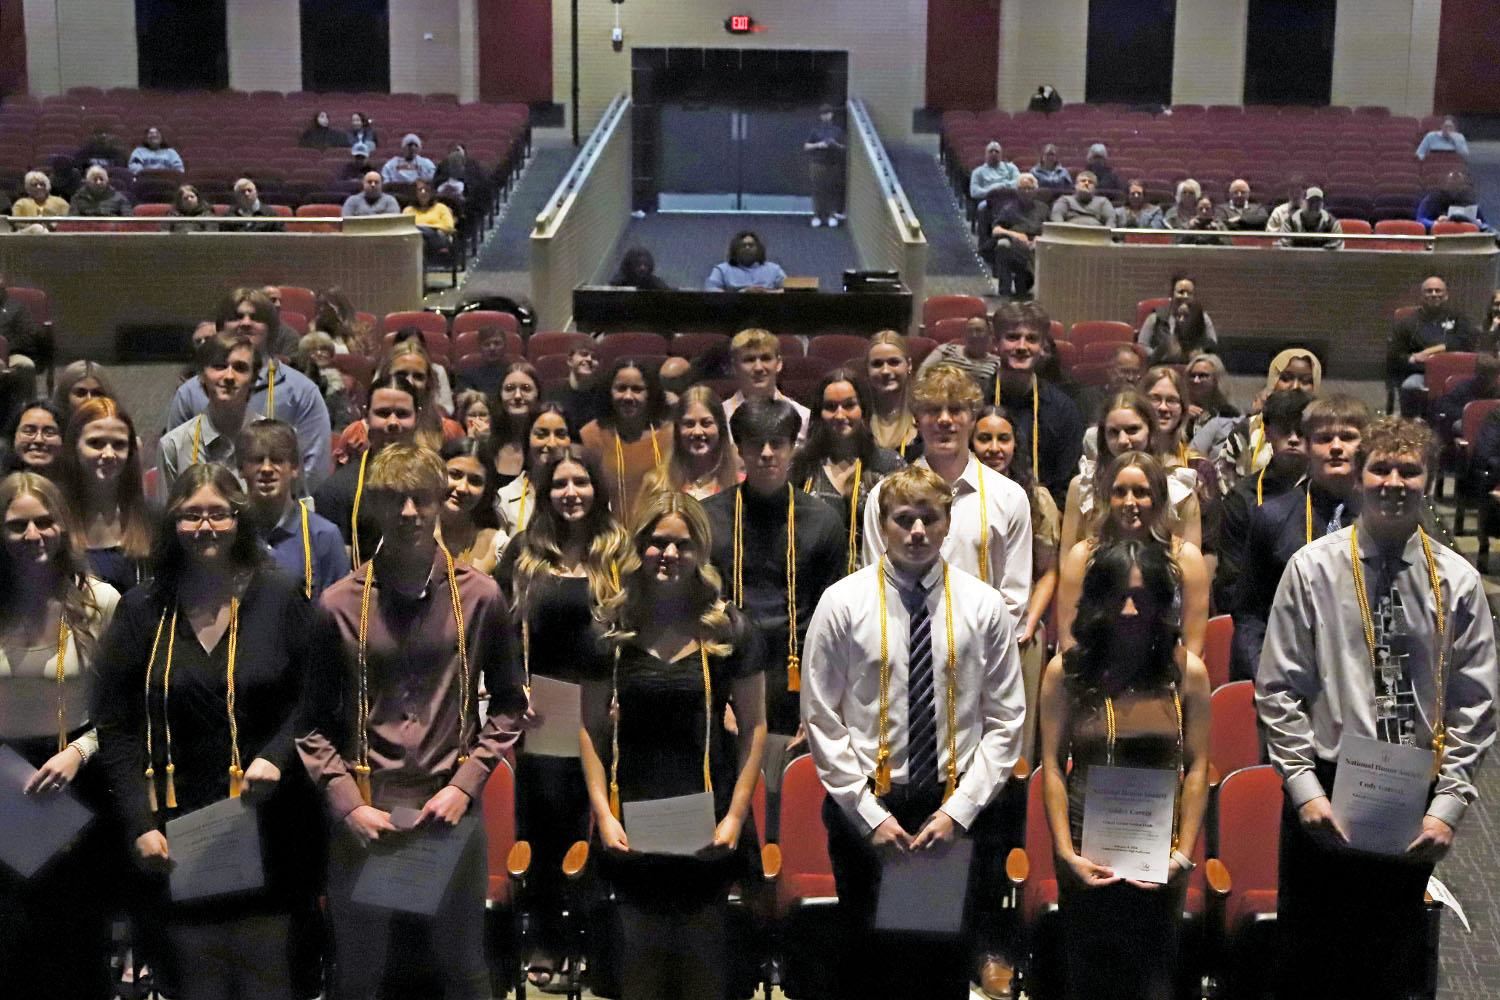 34 GISH Juniors smiling after being inducted into National Honor Society.